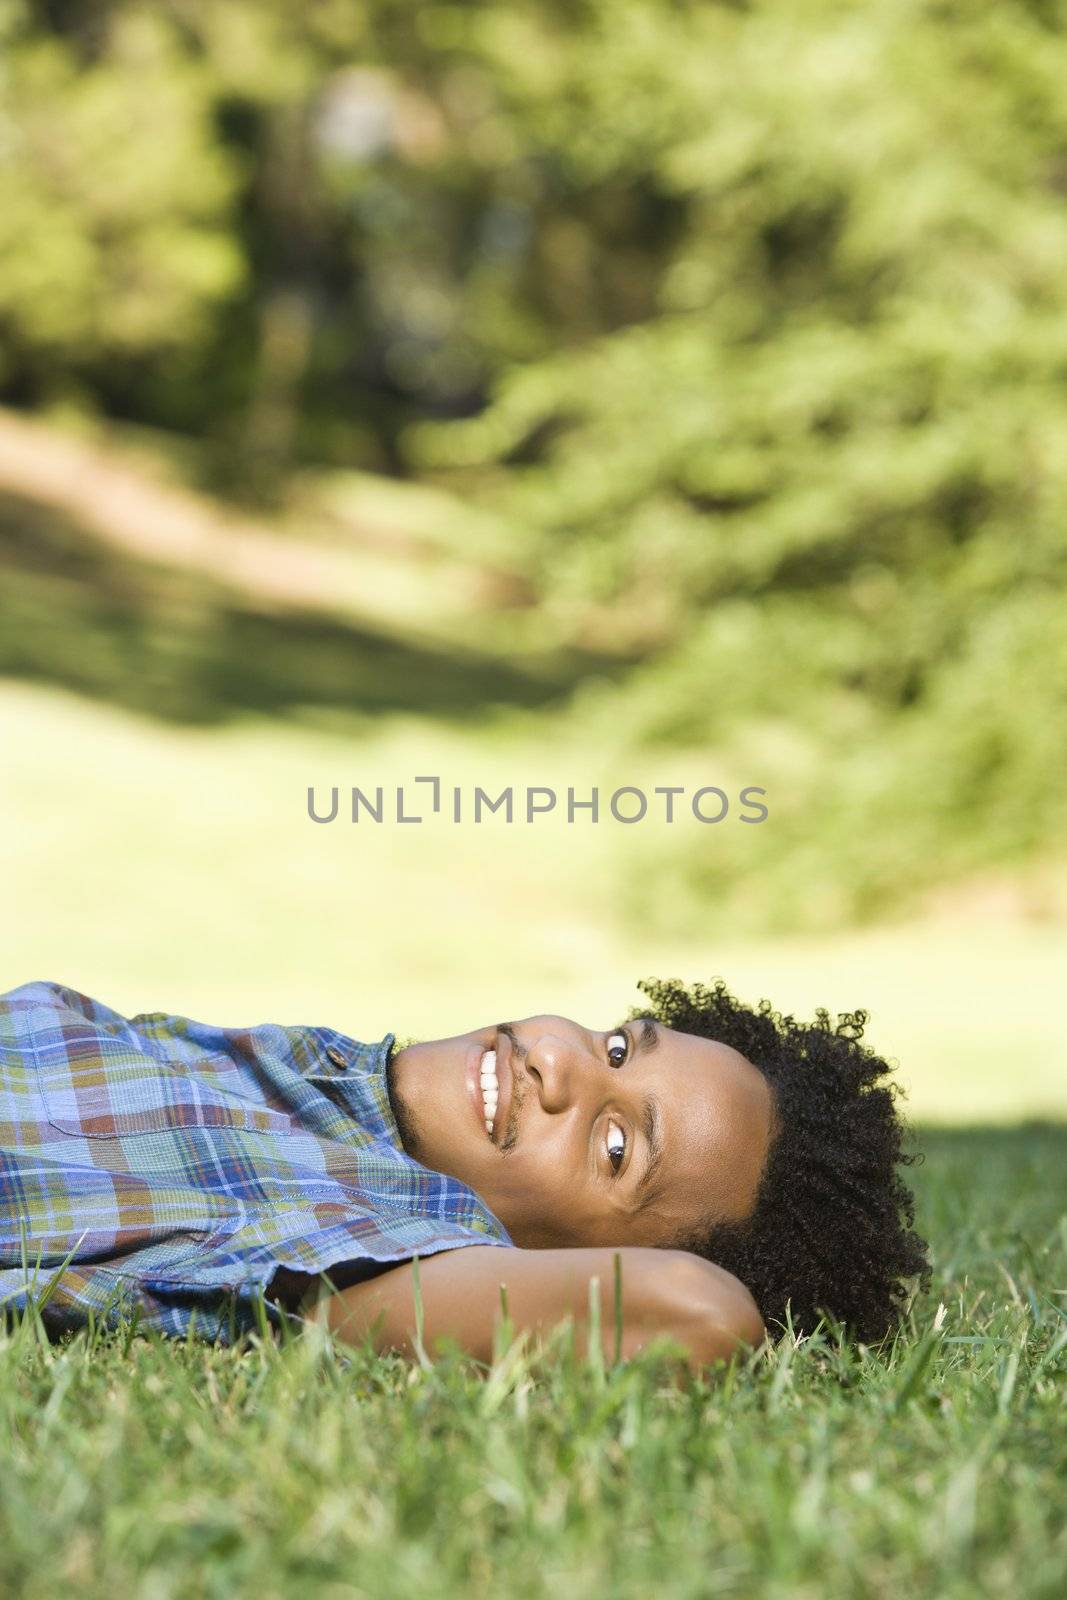 Portrait of man lying in grass in park smiling.